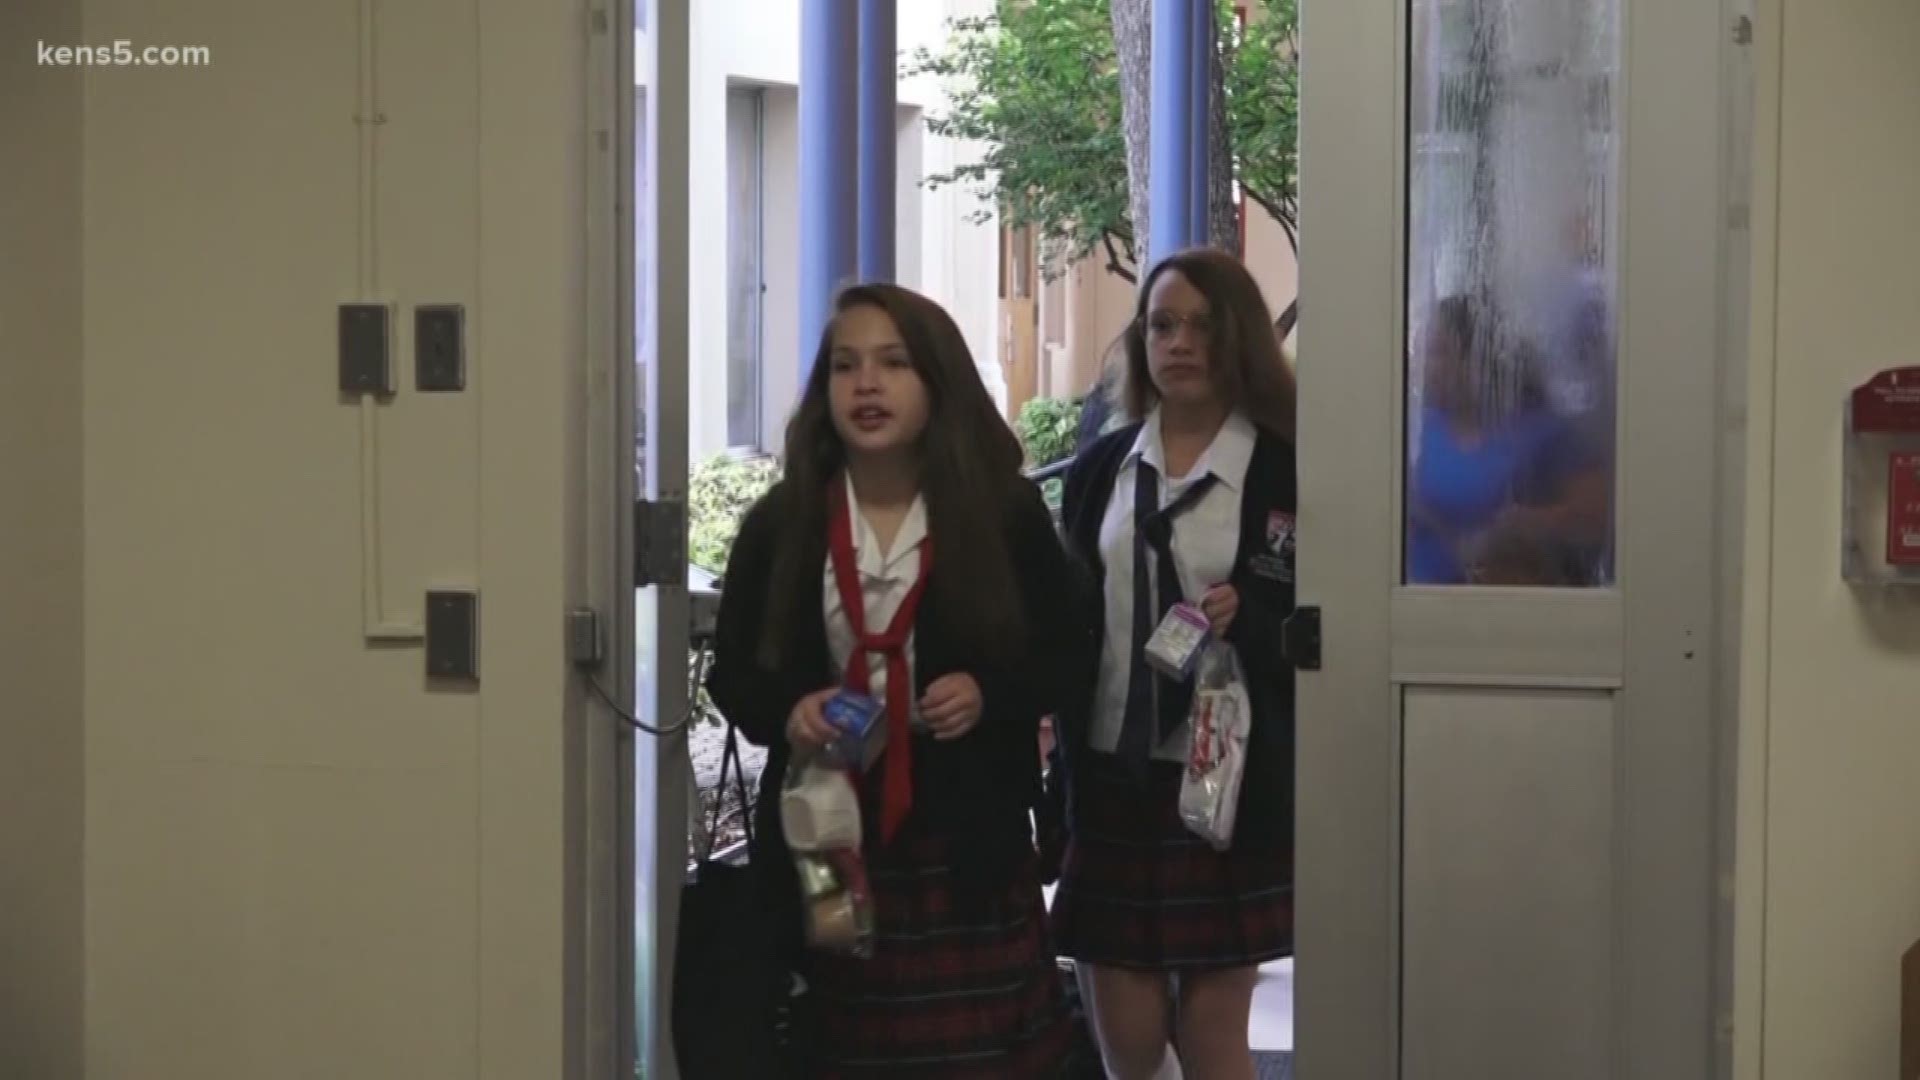 Monday was back to school day for SAISD. The Young Women's Leadership Academy commemorated their 10th anniversary. Eyewitness News reporter Charlie Cooper explains.